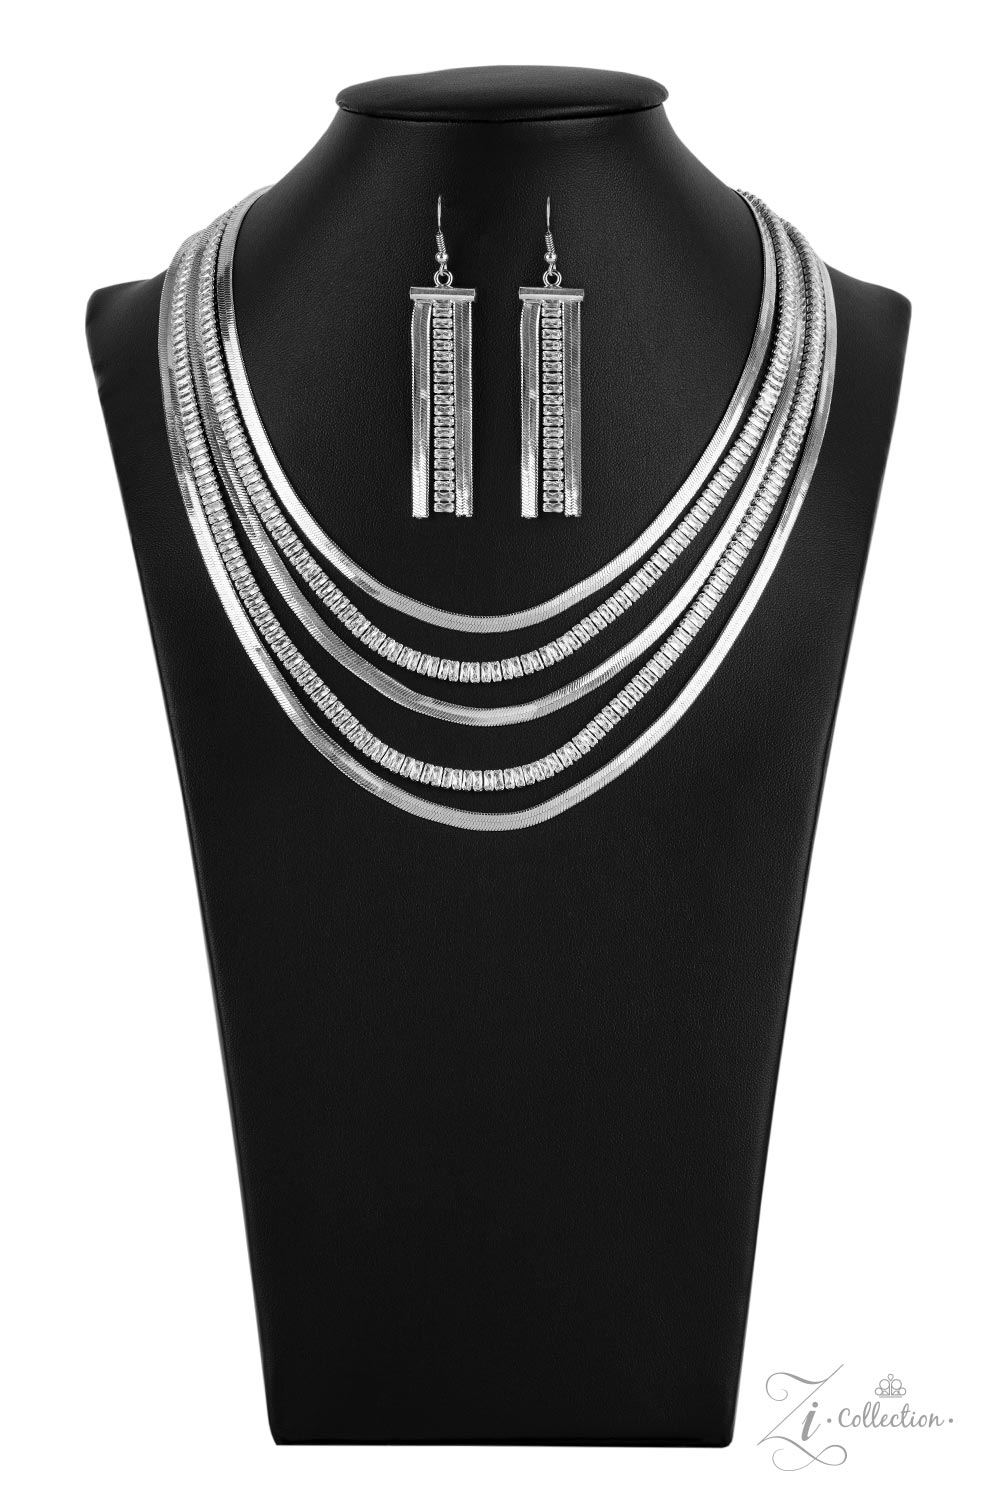 The Persuasive Zi Collection Necklace